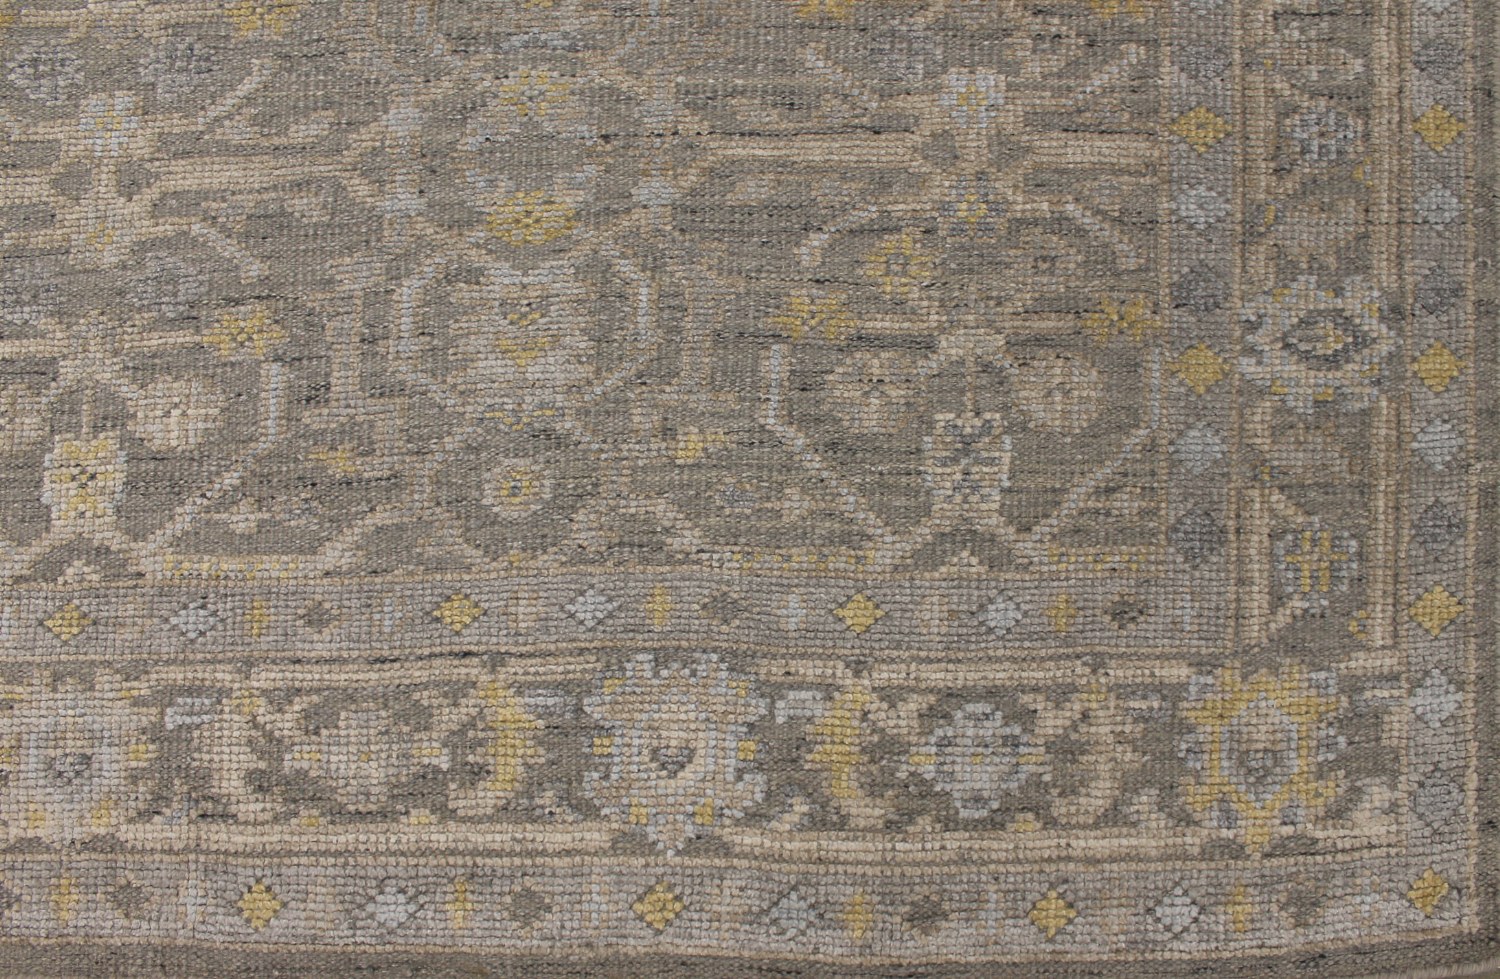 8x10 Oushak Hand Knotted Wool Area Rug - MR026007